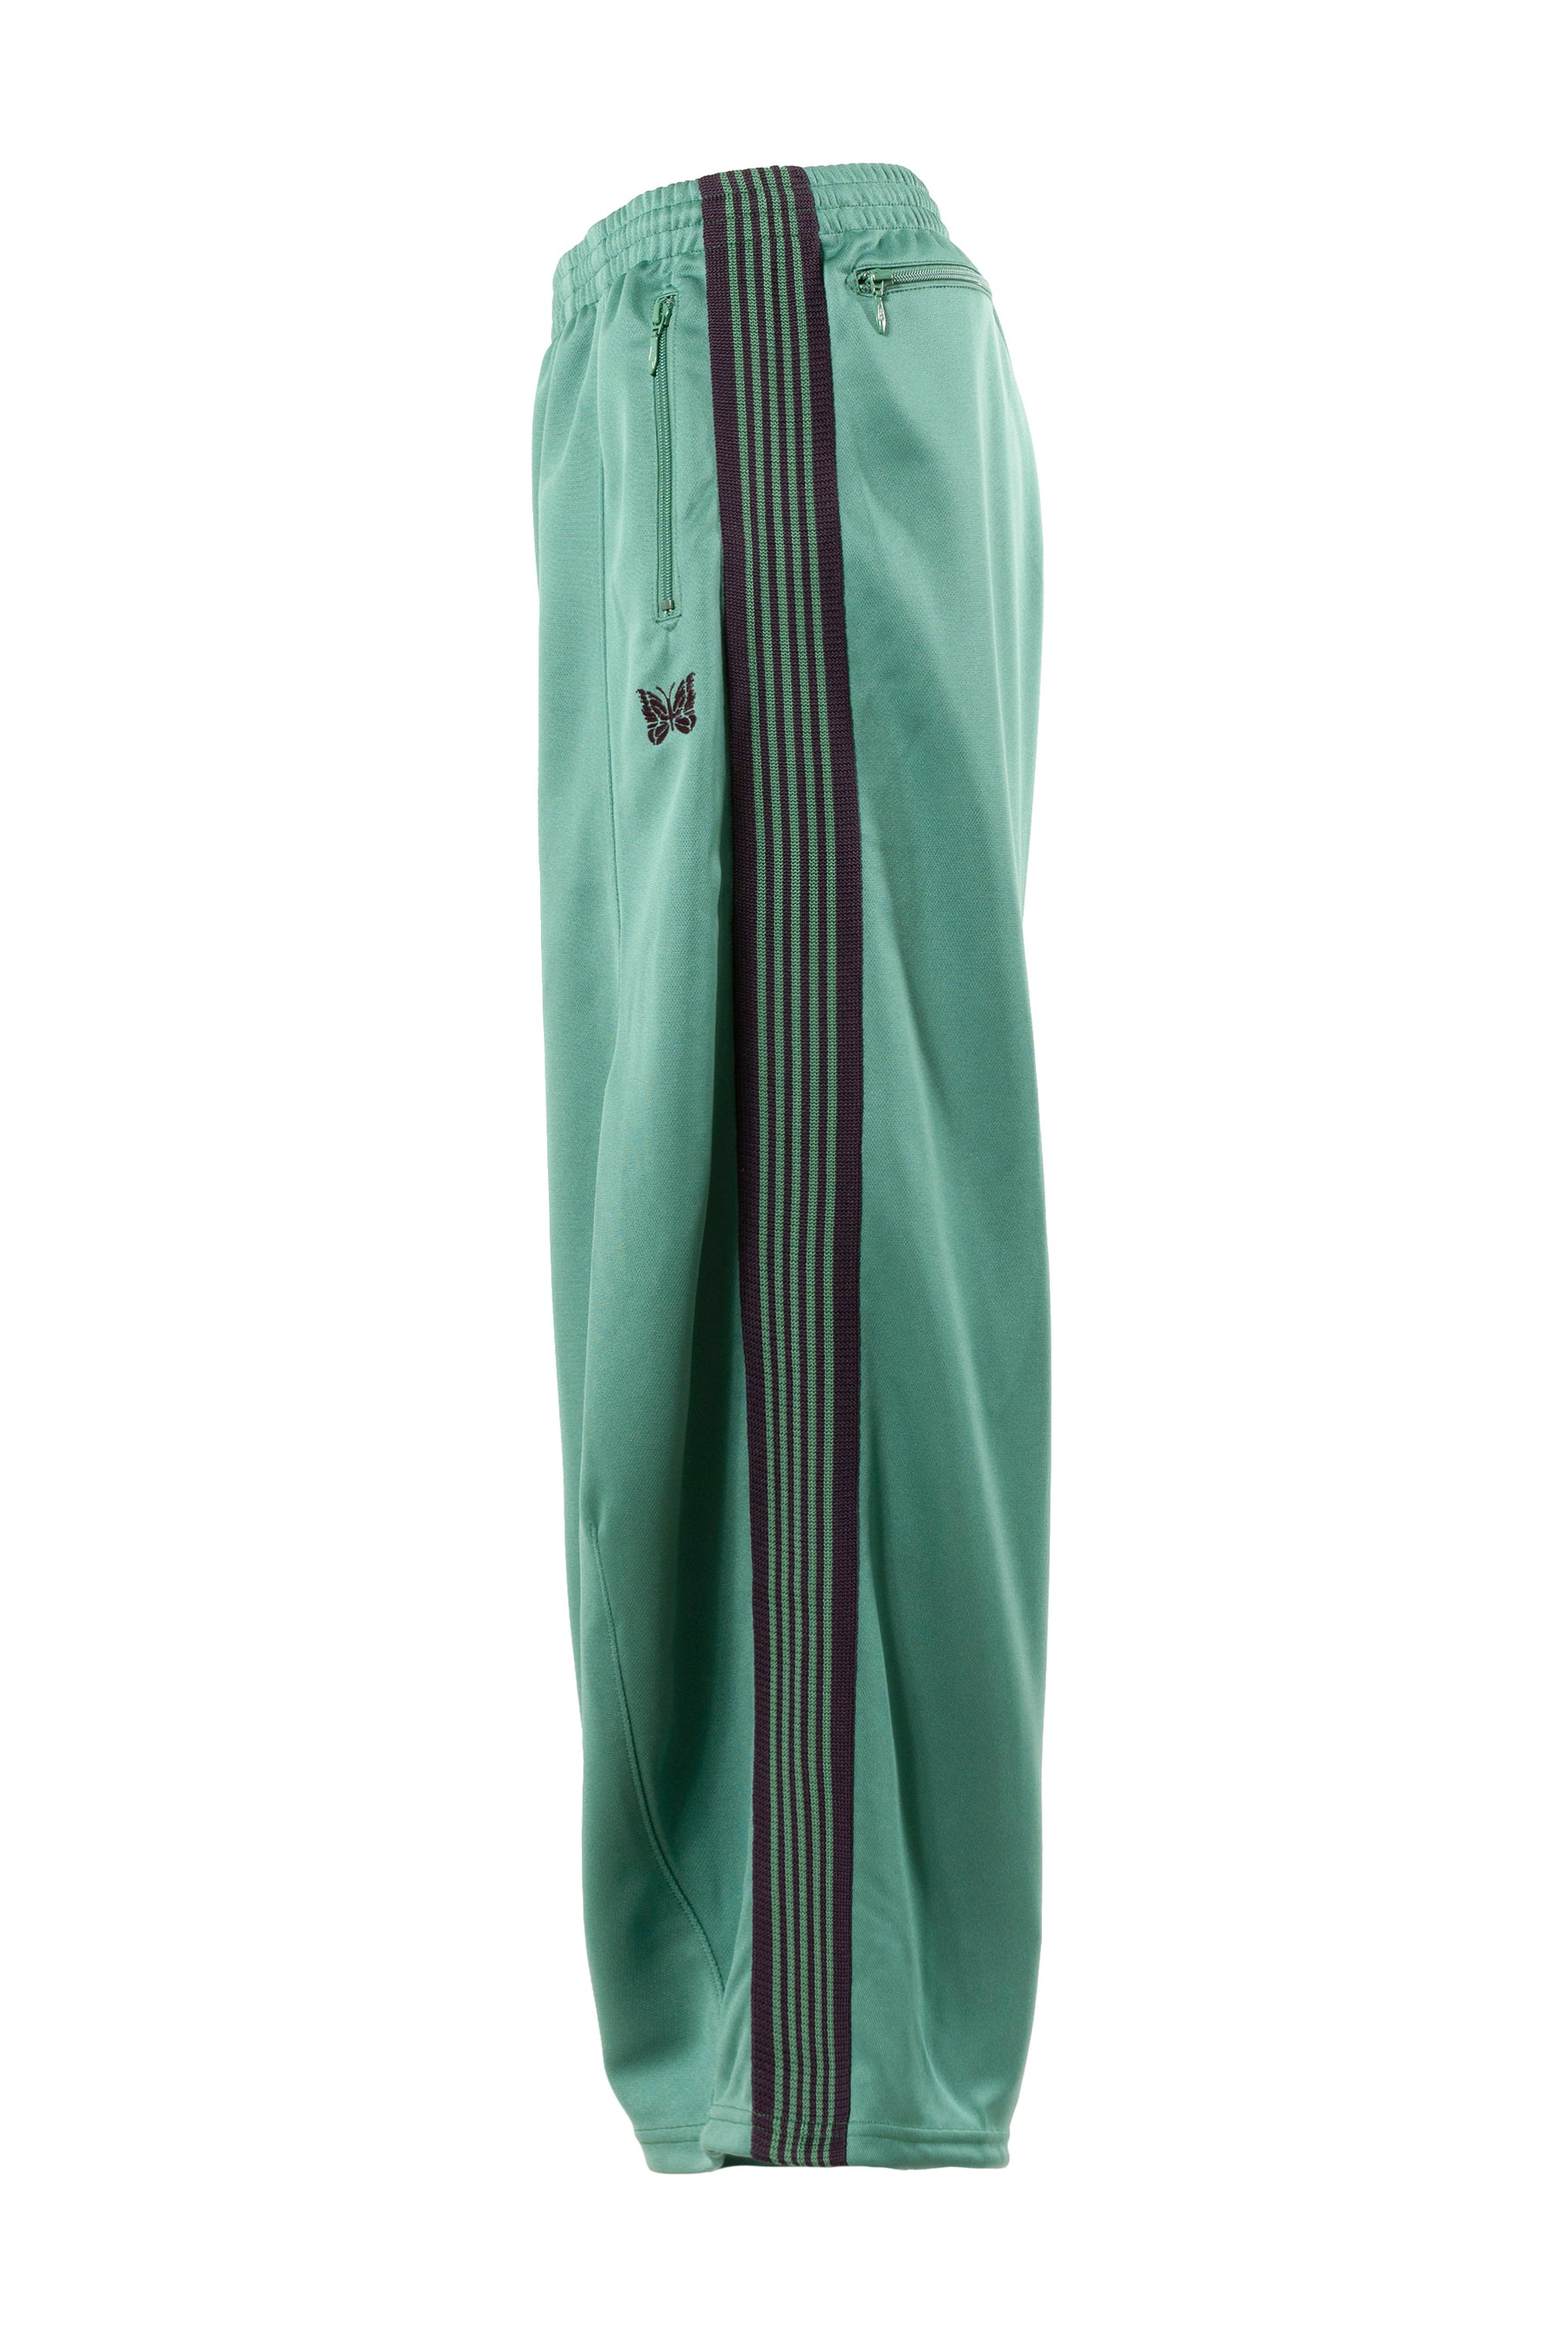 Needles ニードルズ SS23 H.D. TRACK PANT - POLY SMOOTH / EMERALD